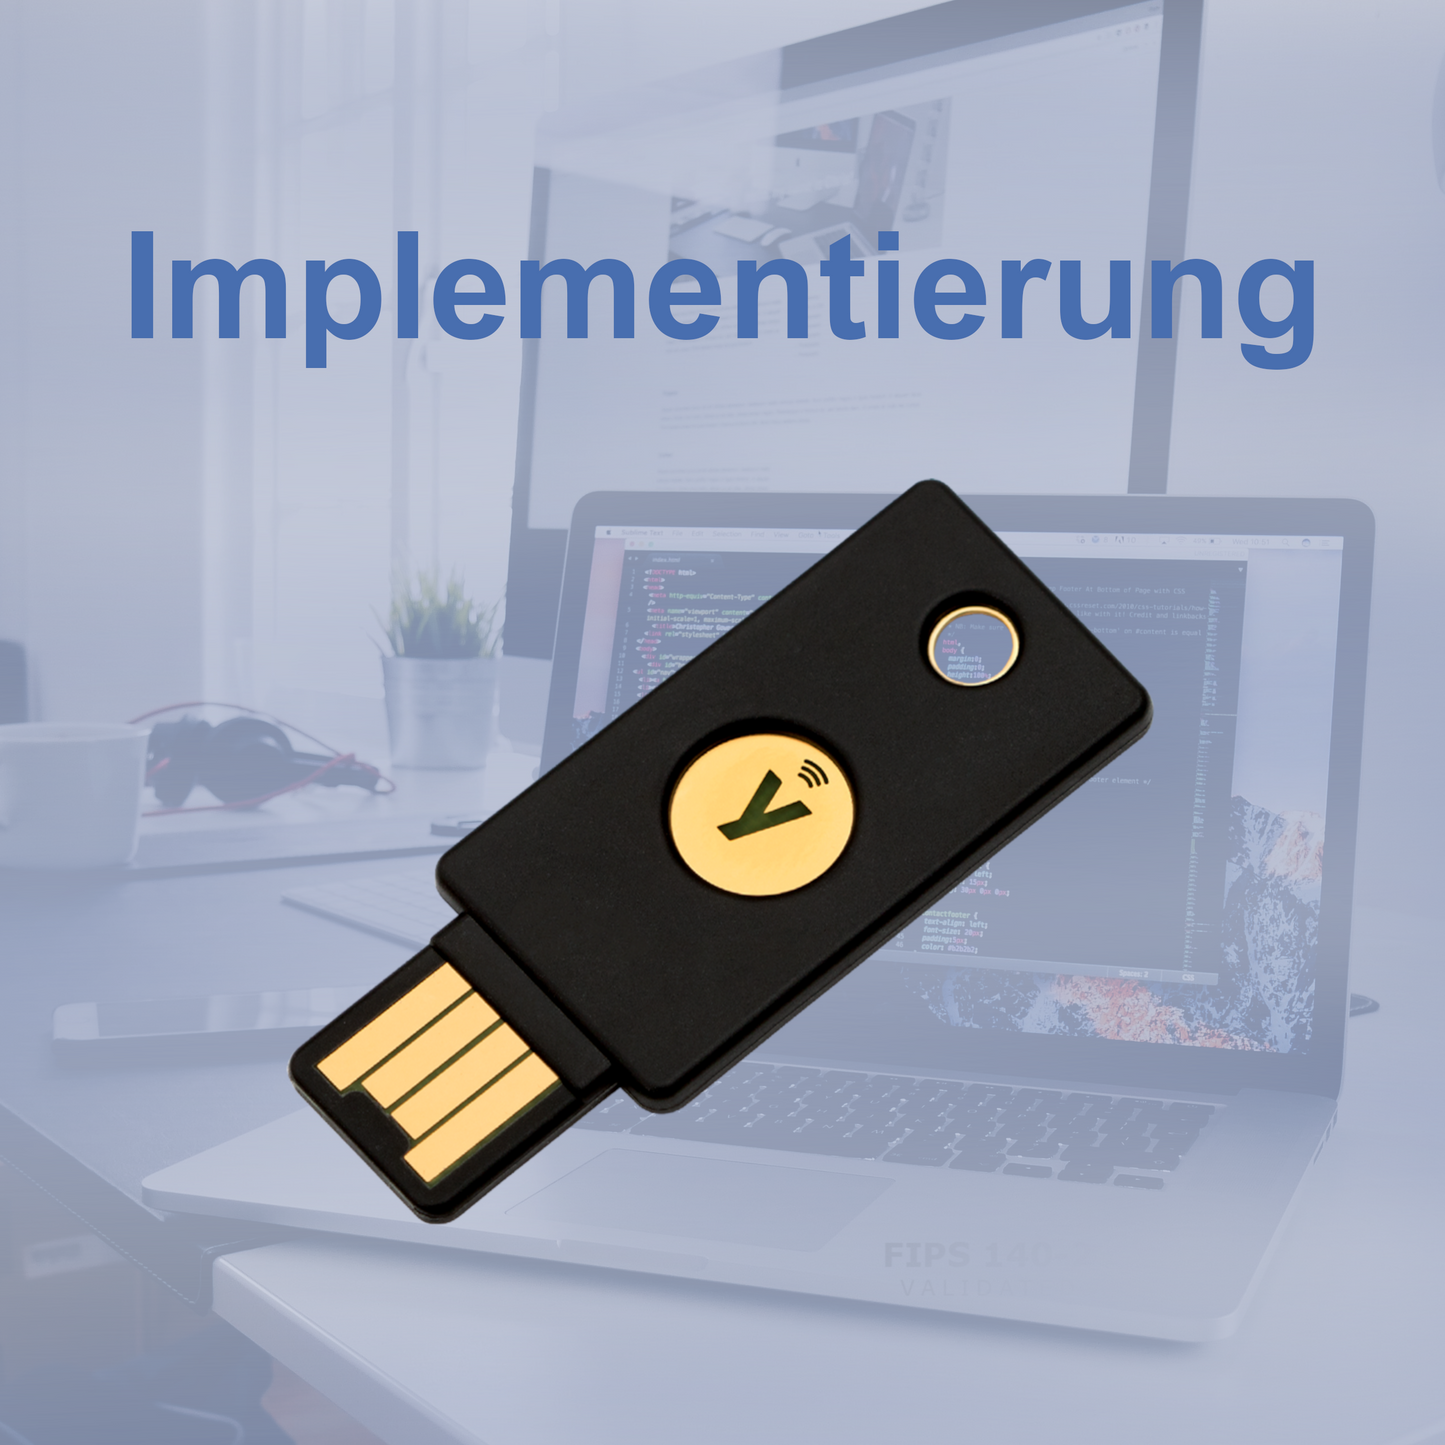 Implementierung Yubikey in Active Directory